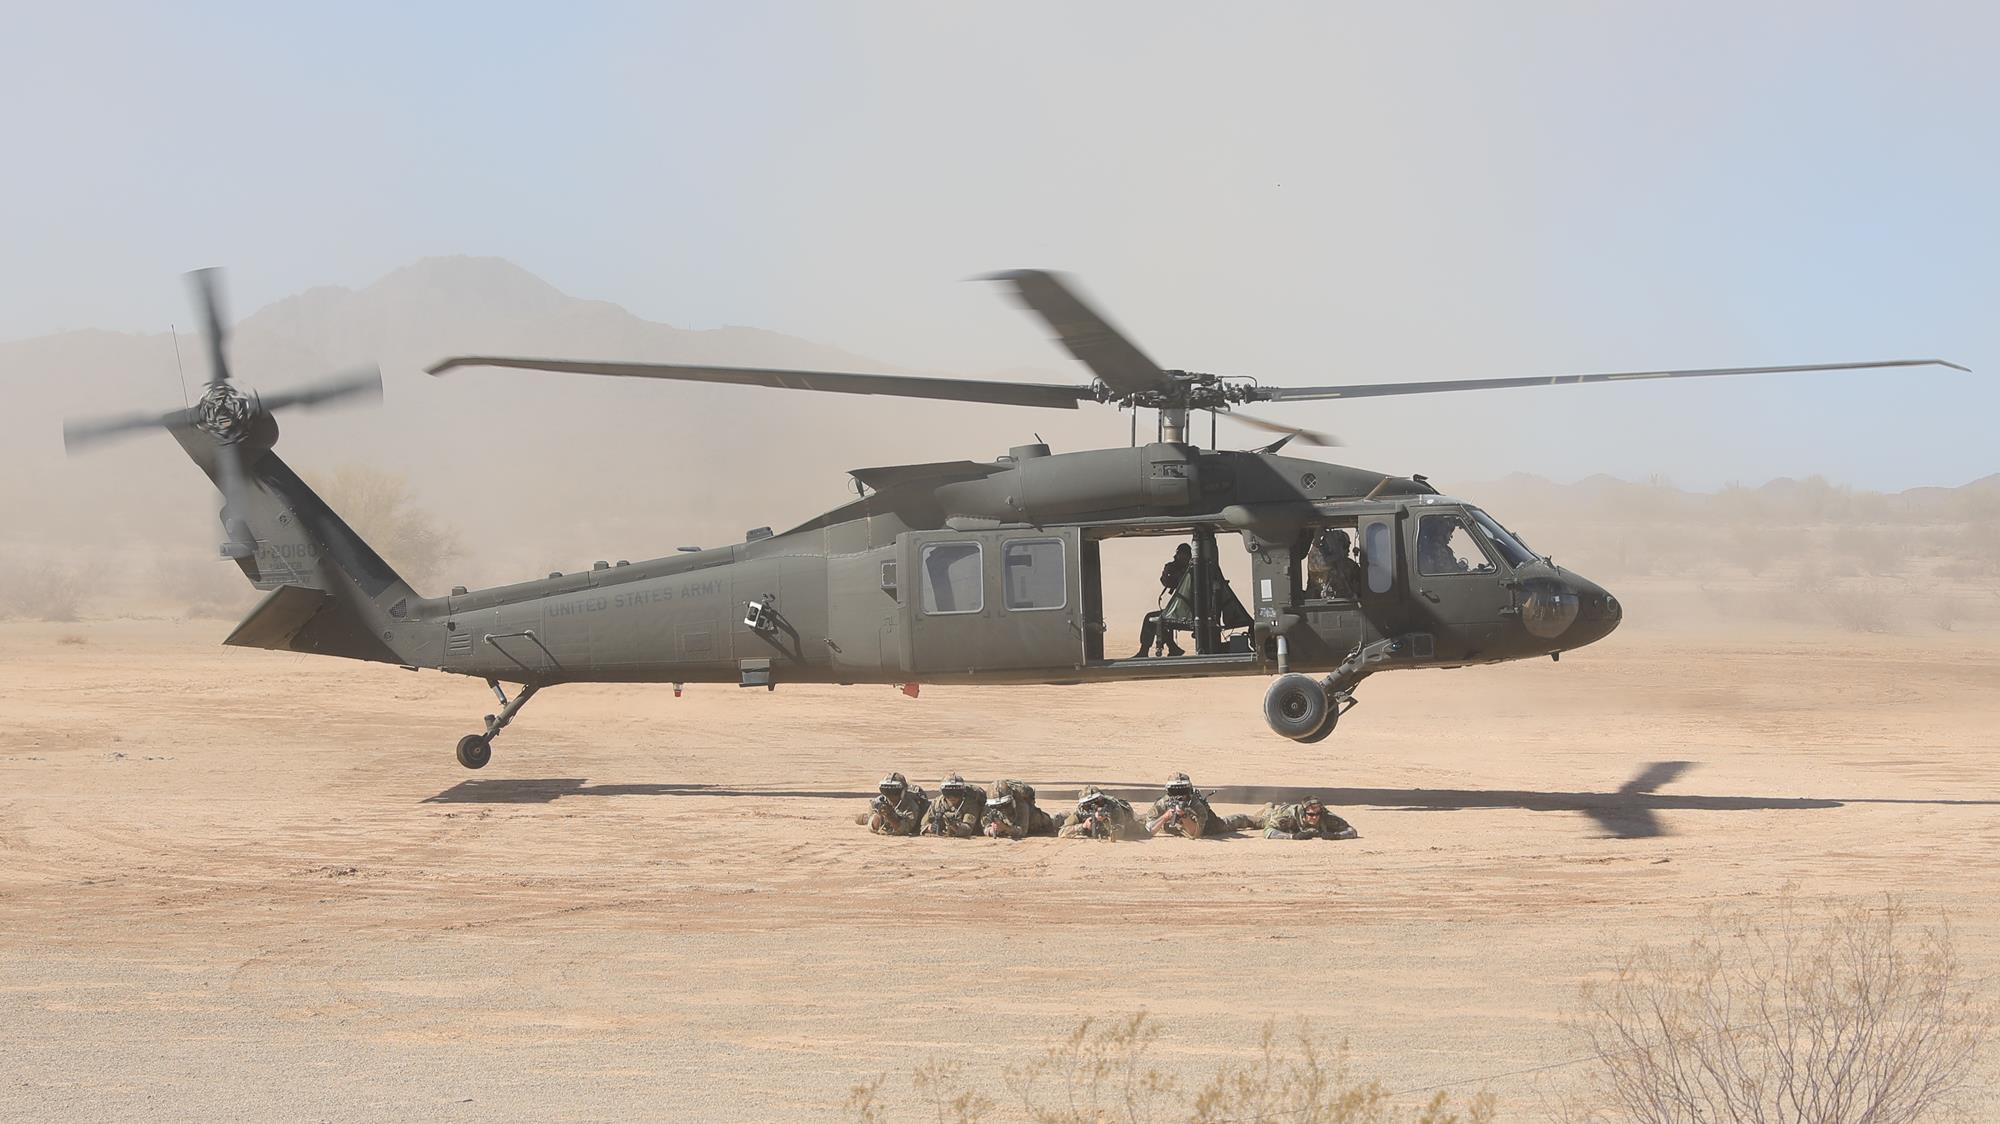 UH-60: New Anti-Collision Light Coming > The U.S. Army's